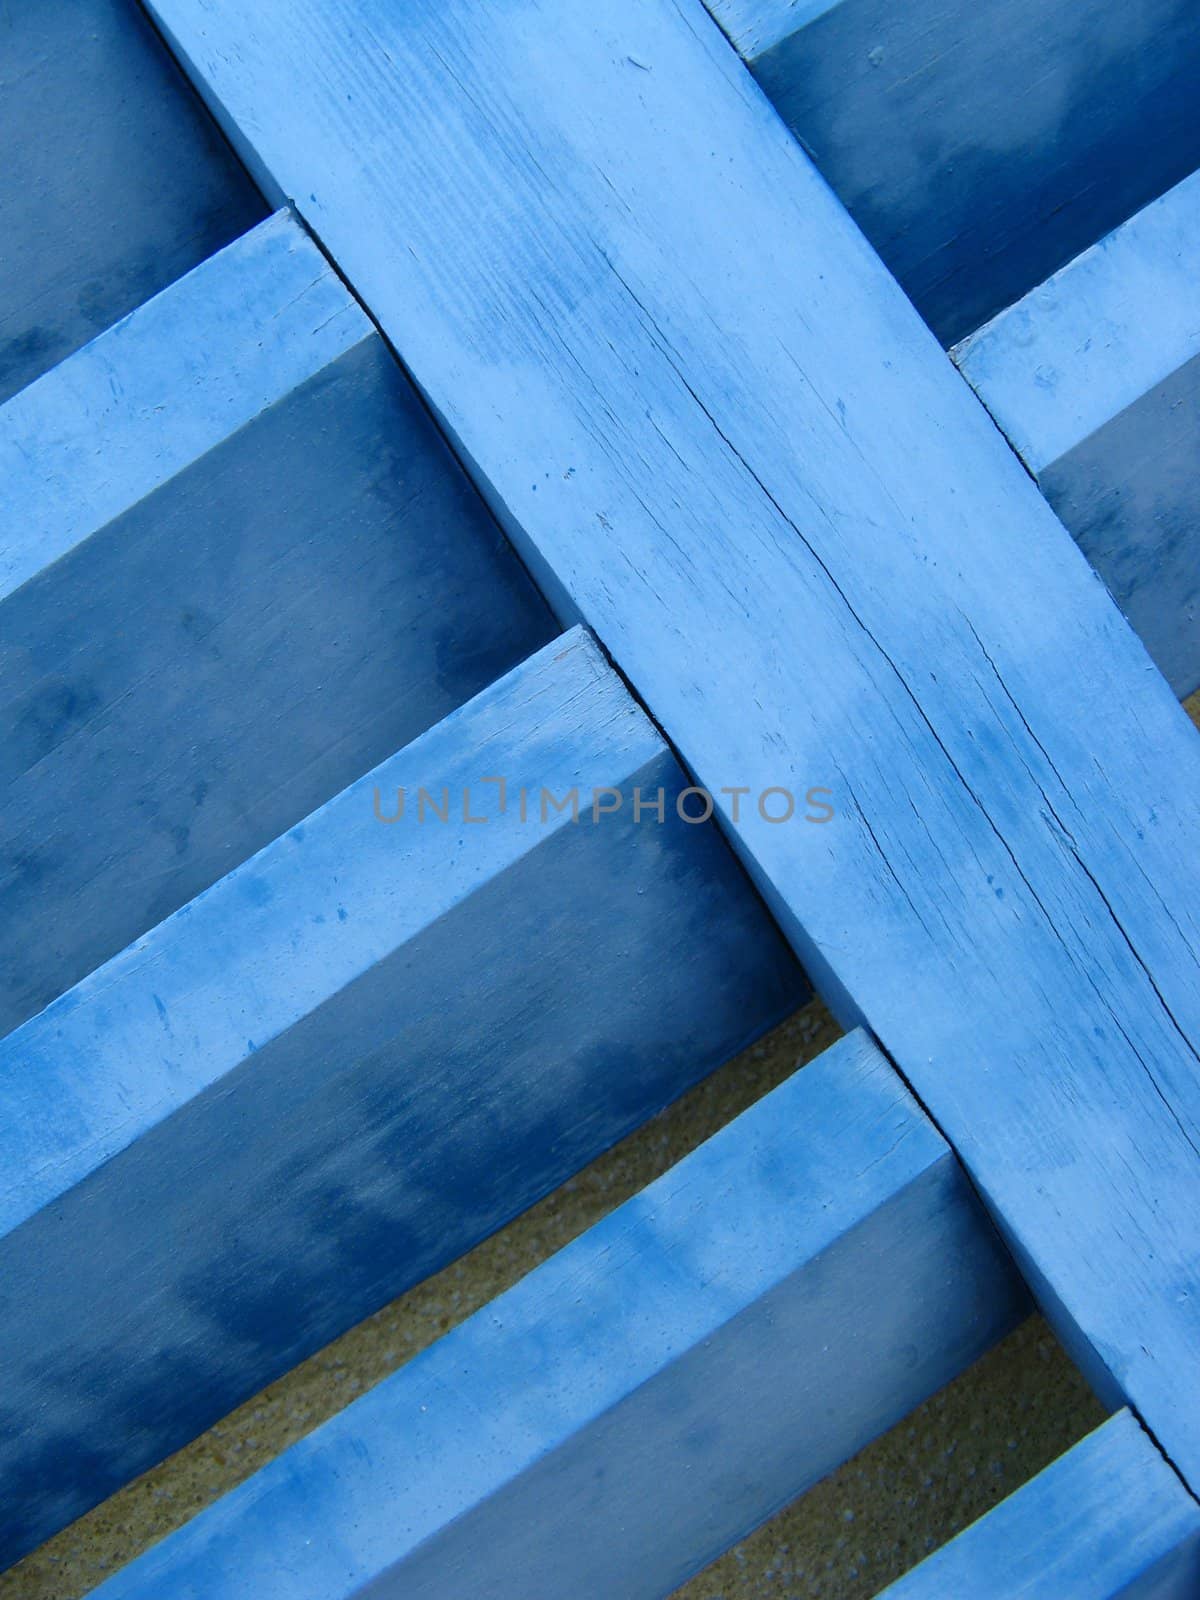 close-up image of a blue shutter